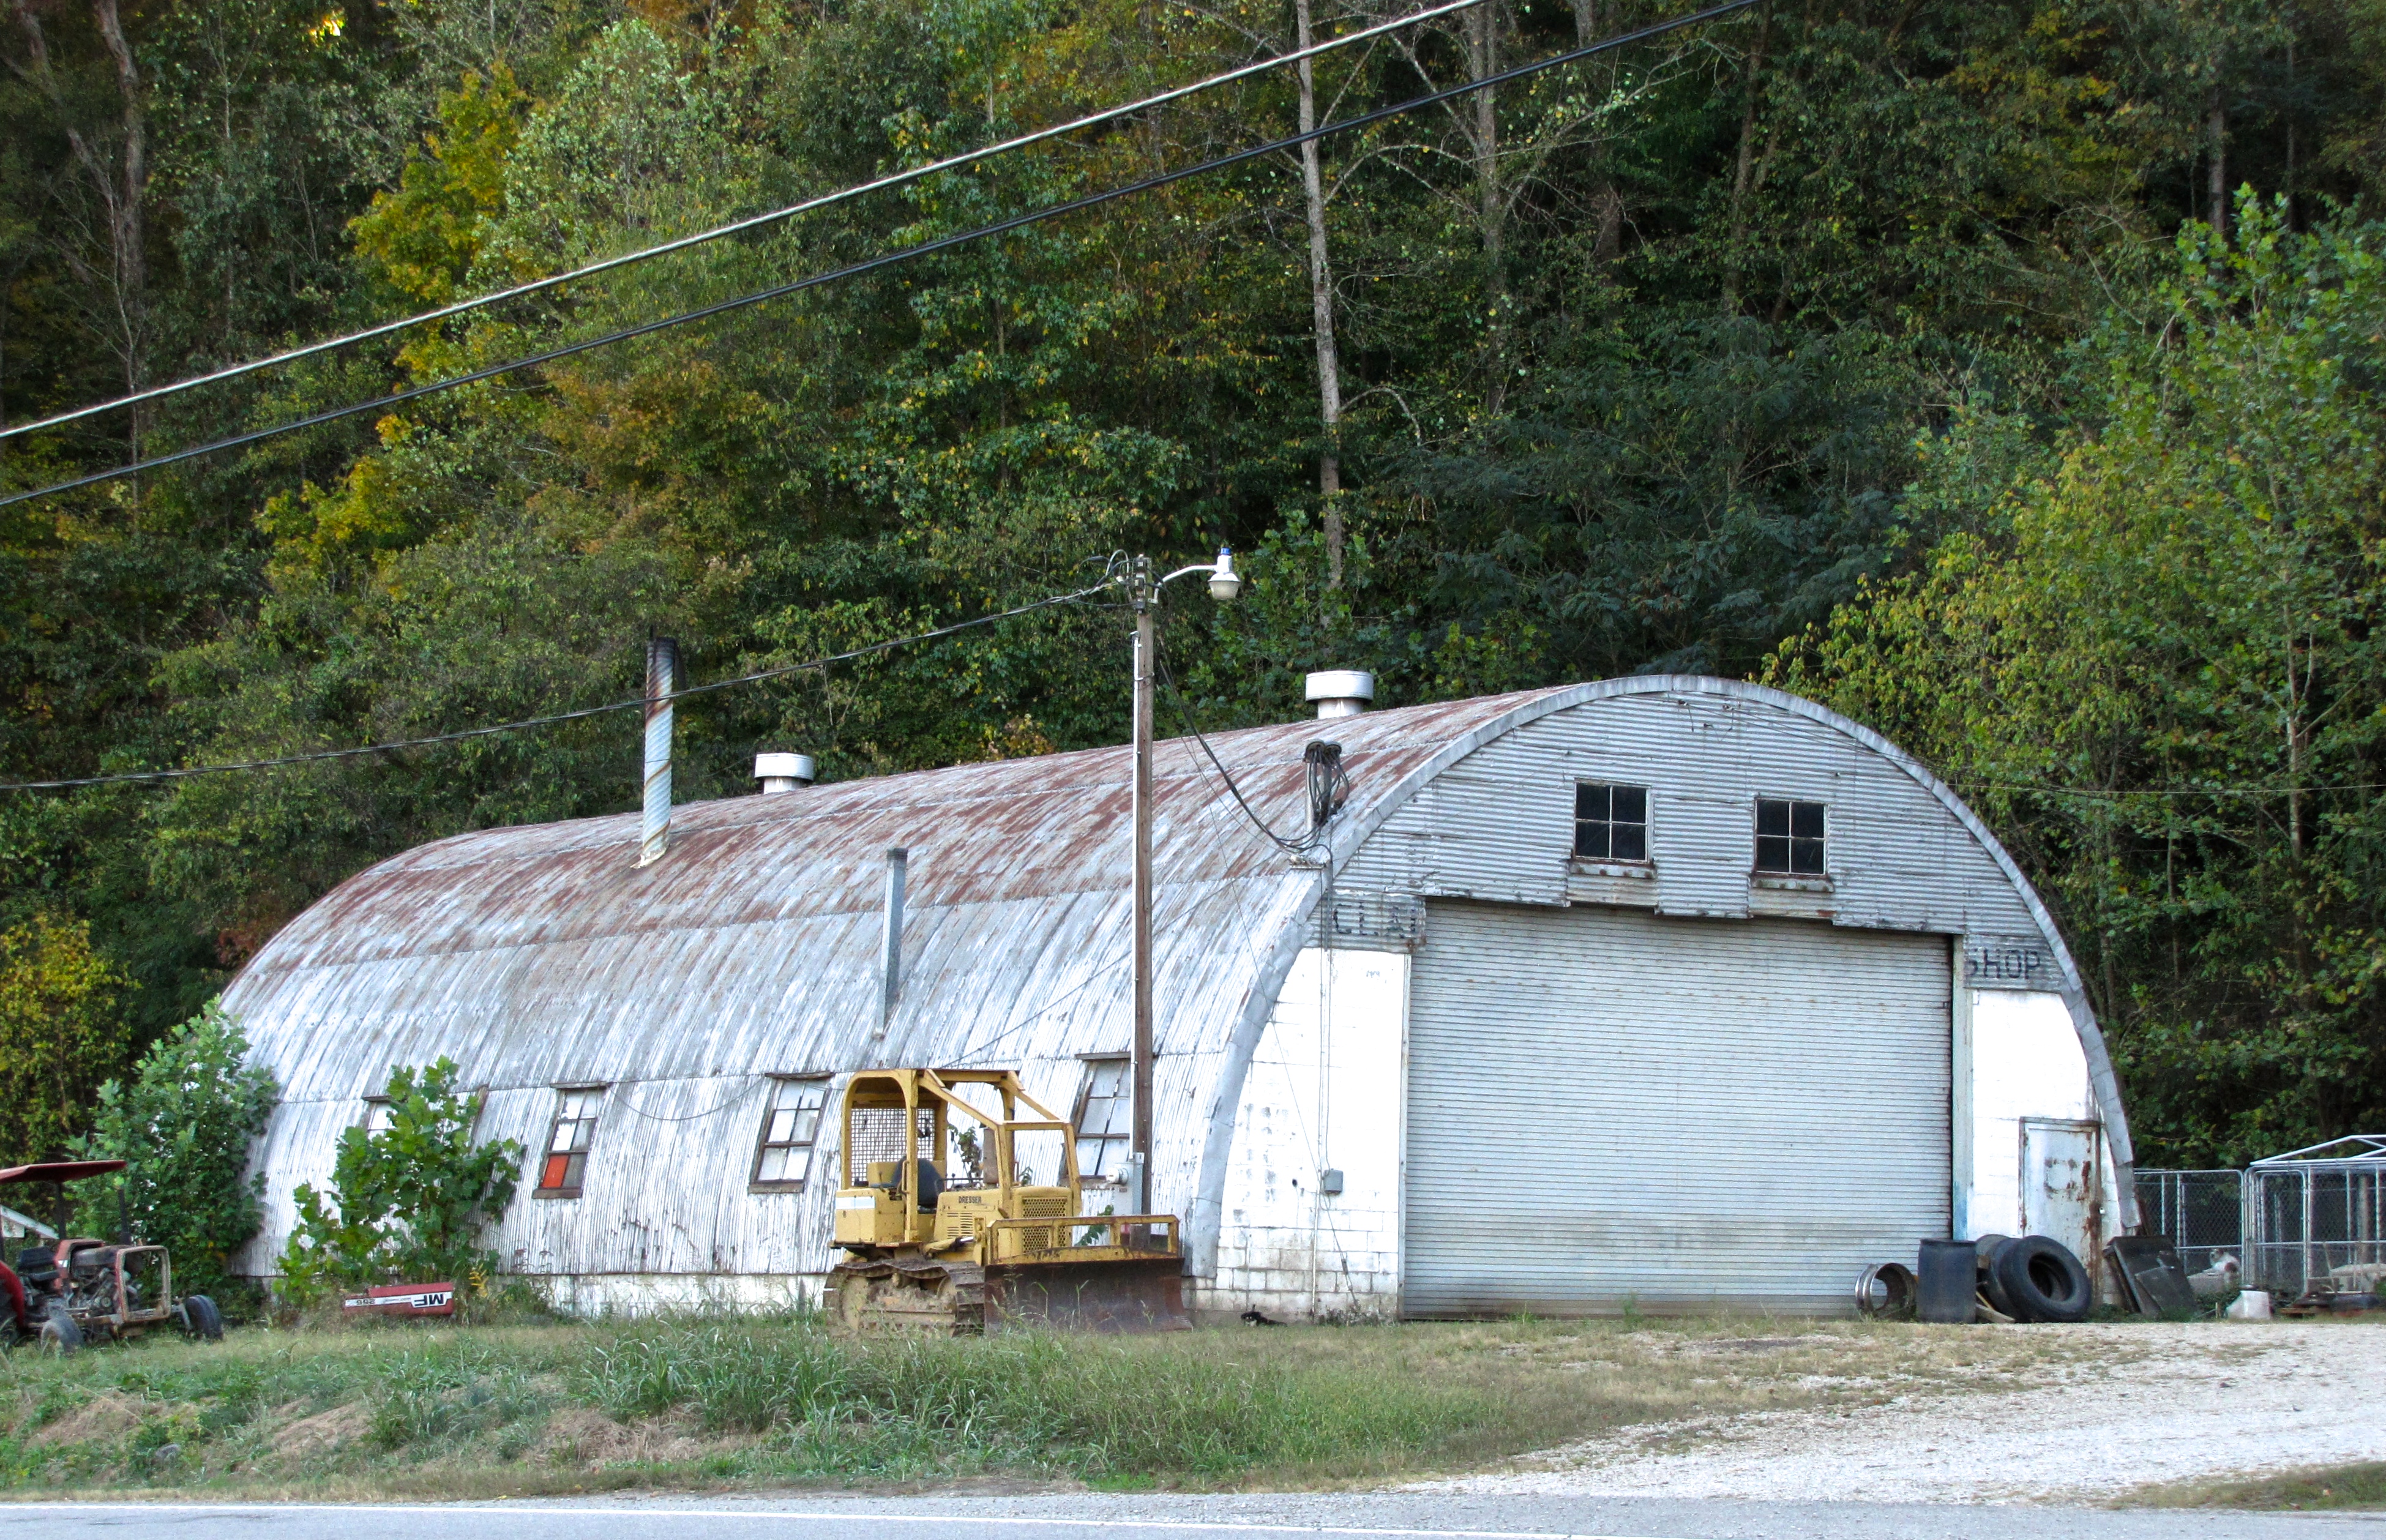 quonset hut in Southington, CT